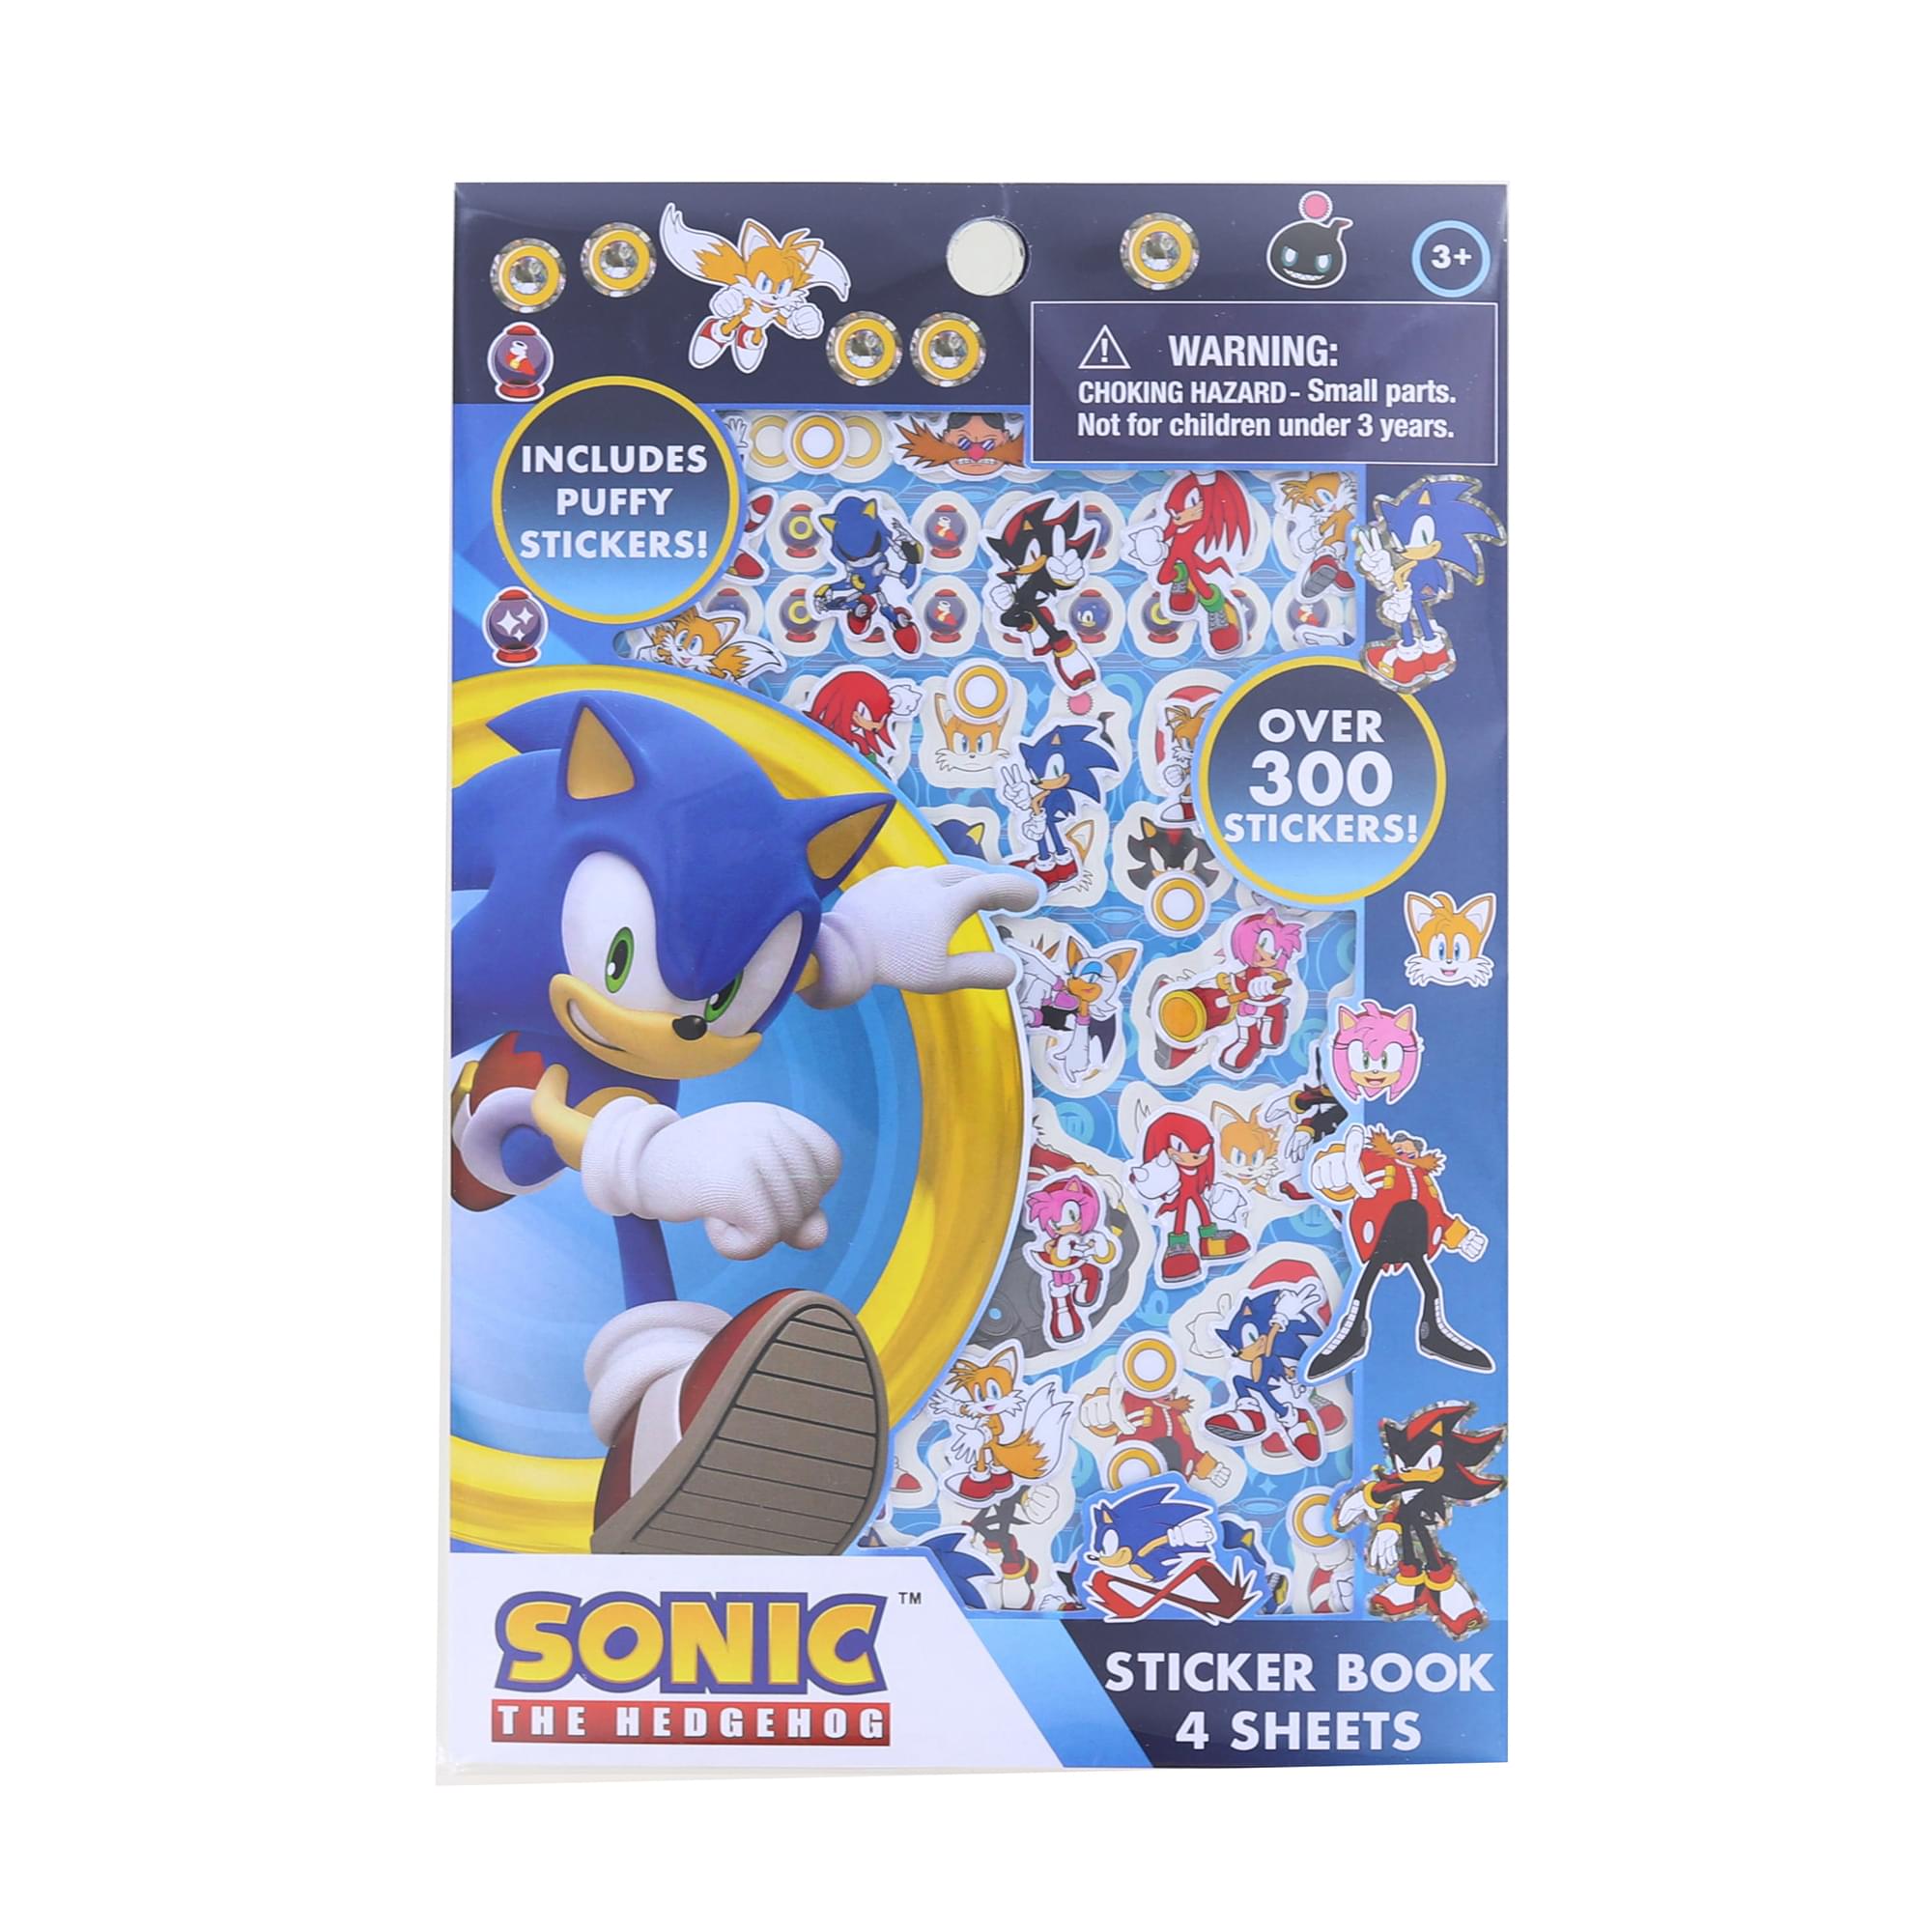 Sonic The Hedgehog Sticker Book , 4 Sheets , Over 300 Stickers